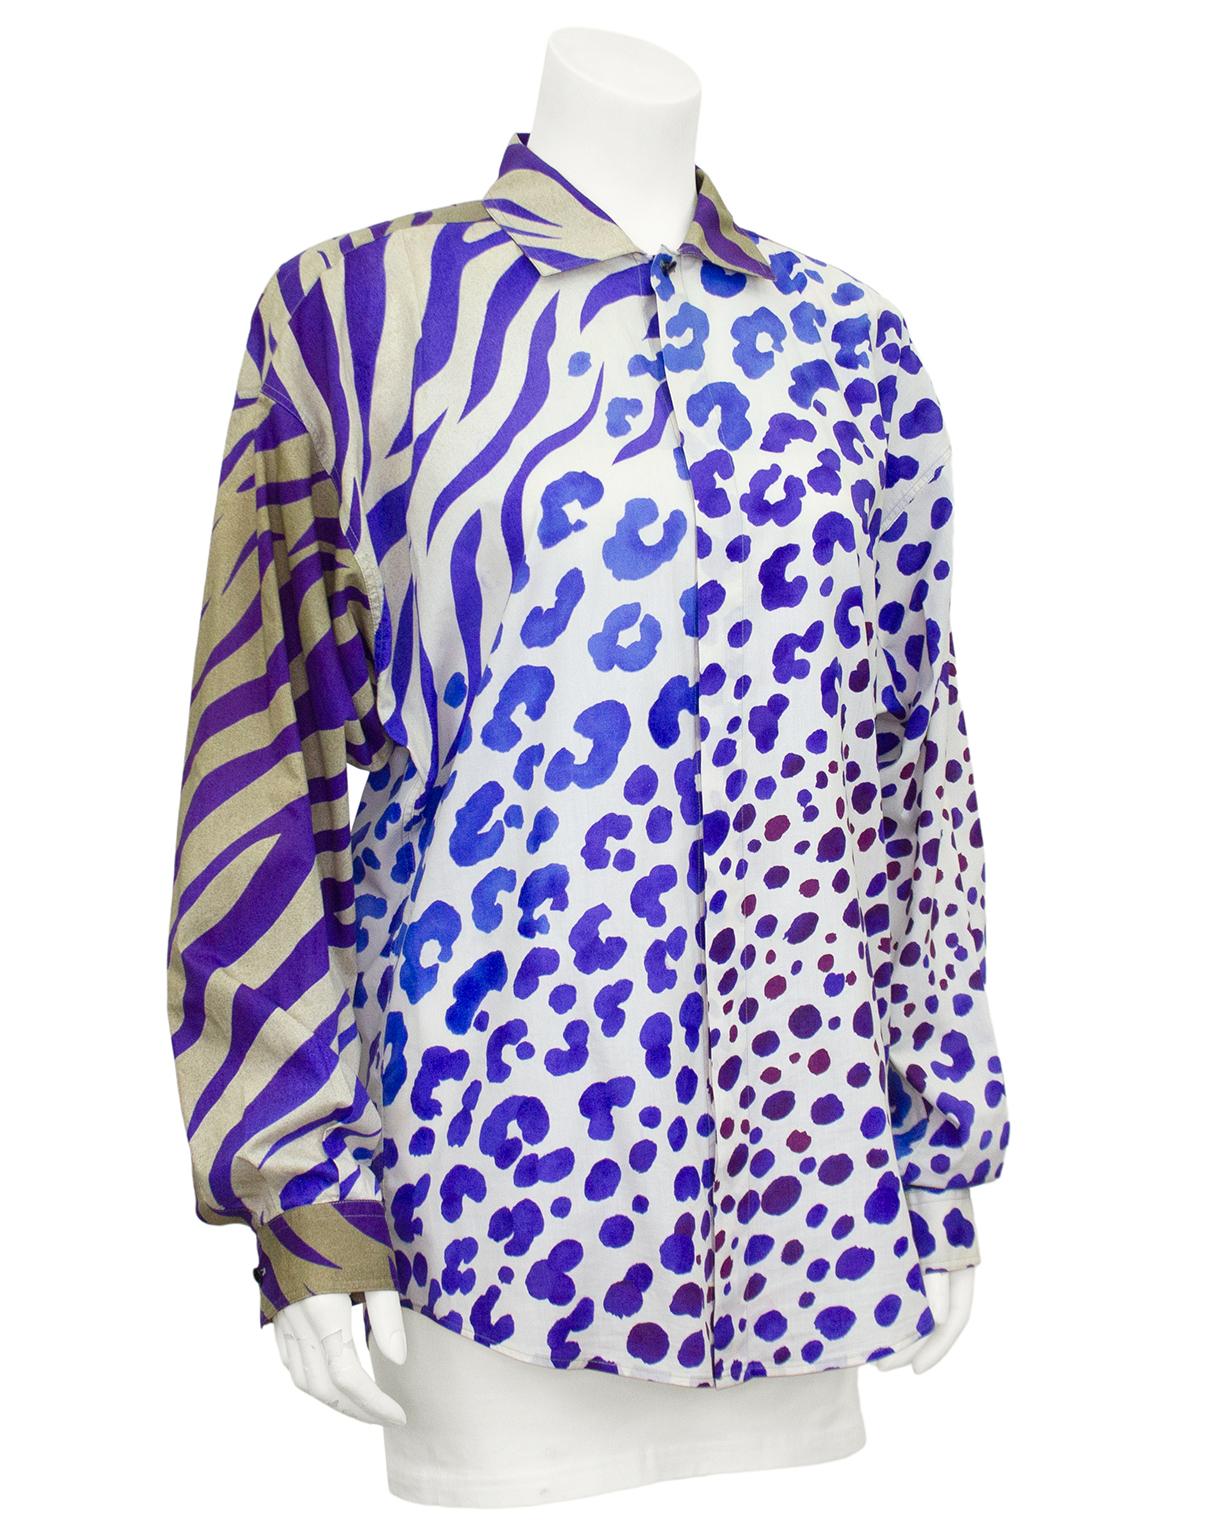 Classically fabulous and over the top Gianni Versace cotton shirt from the early 1990s. Mix of tan and purple zebra print with cream and purple leopard print. Easy washable and breathable cotton. Cut like a mens dress shirt. Excellent vintage